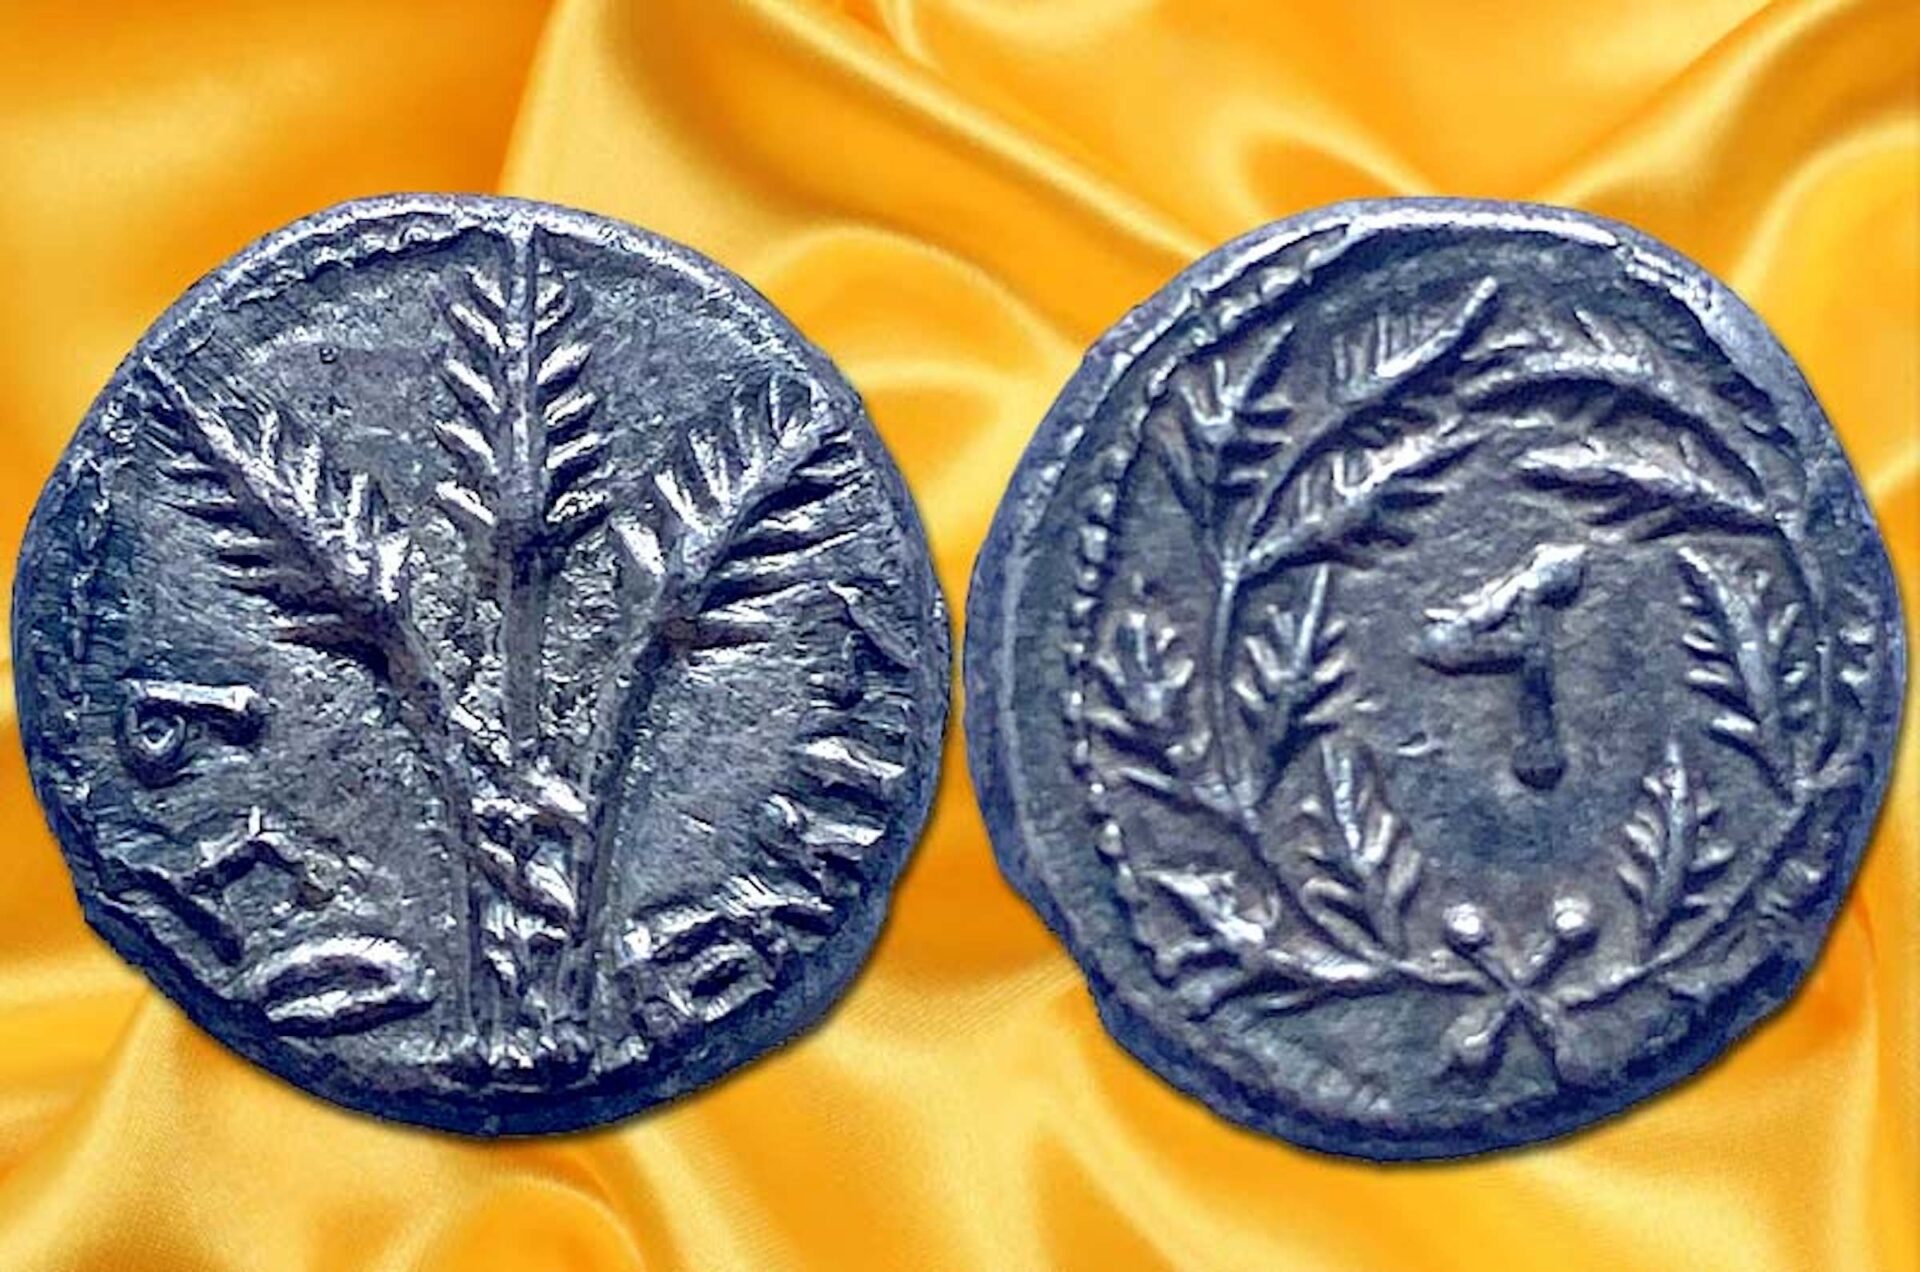 Pilfered rare Judean quarter-shekel coin repatriated to Israel from the U.S.